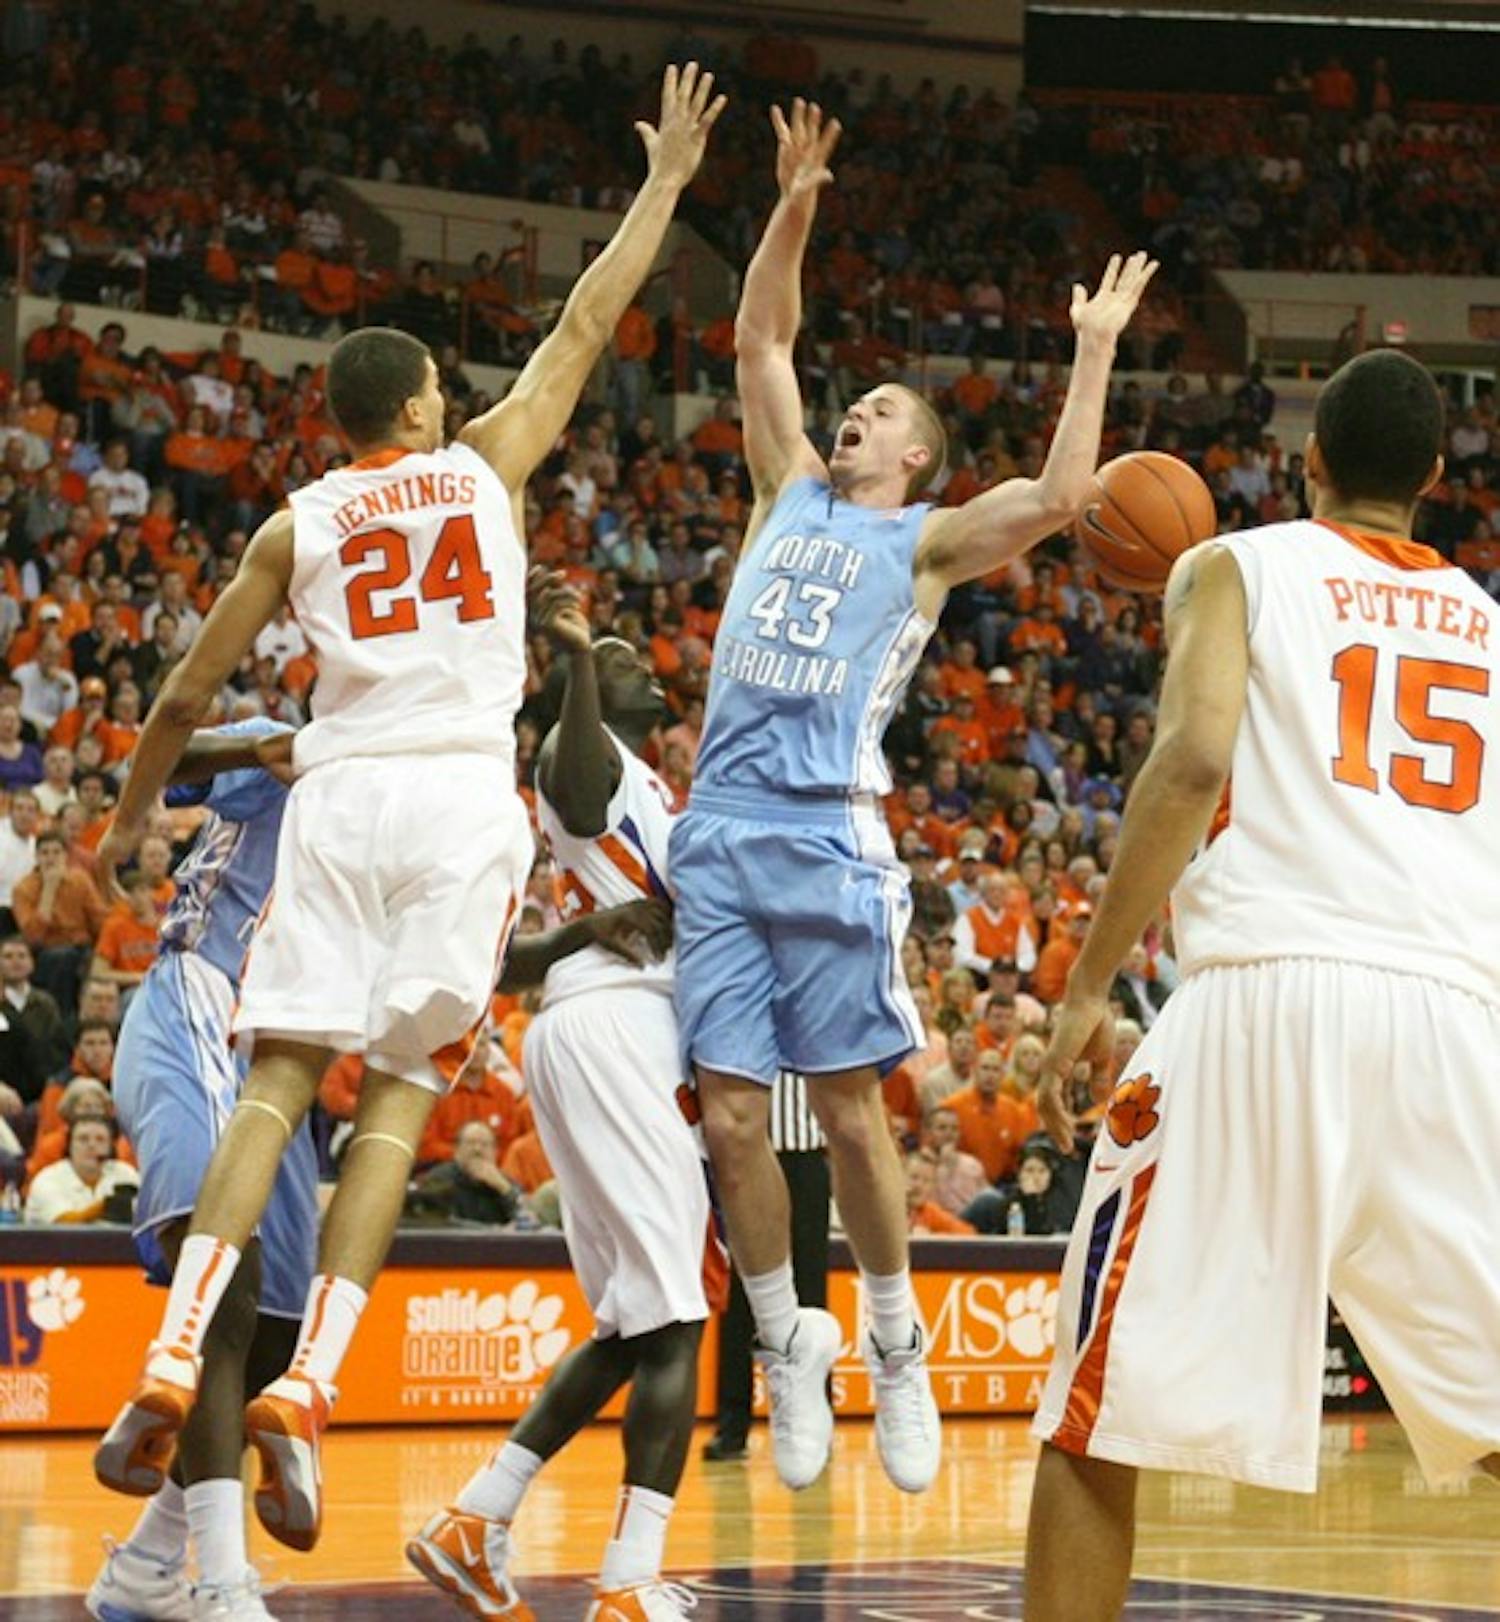 Freshman Travis Wear stepped into Davis’ role last week against Wake Forest in his first career start. DTH/Phong Dinh